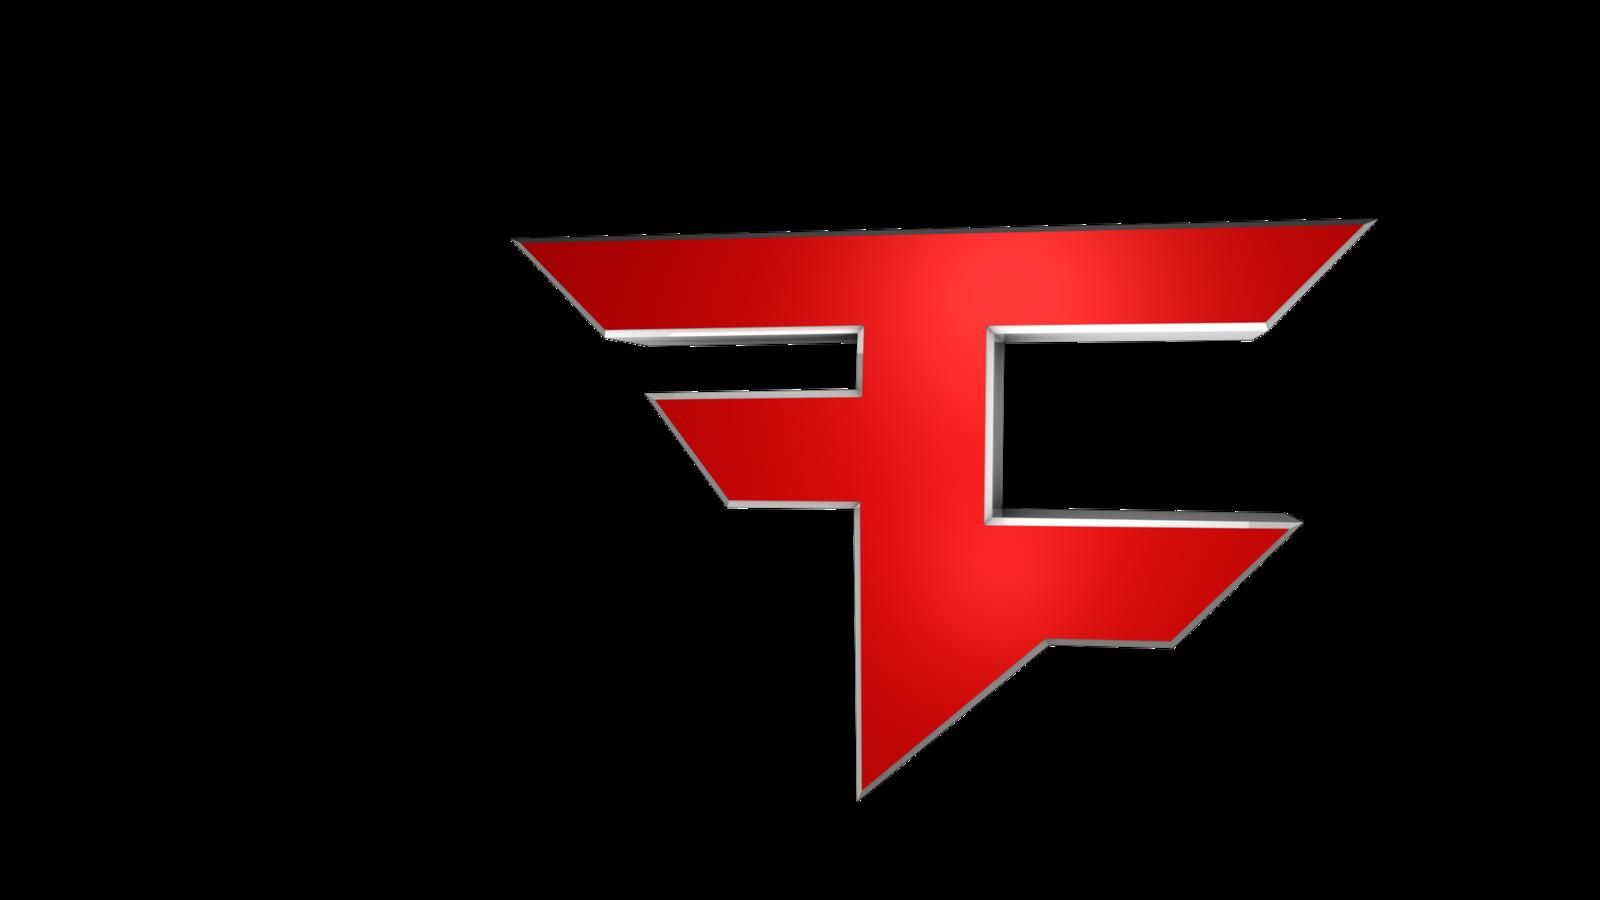 City collaborate with FaZe Clan to bring football to Fortnite